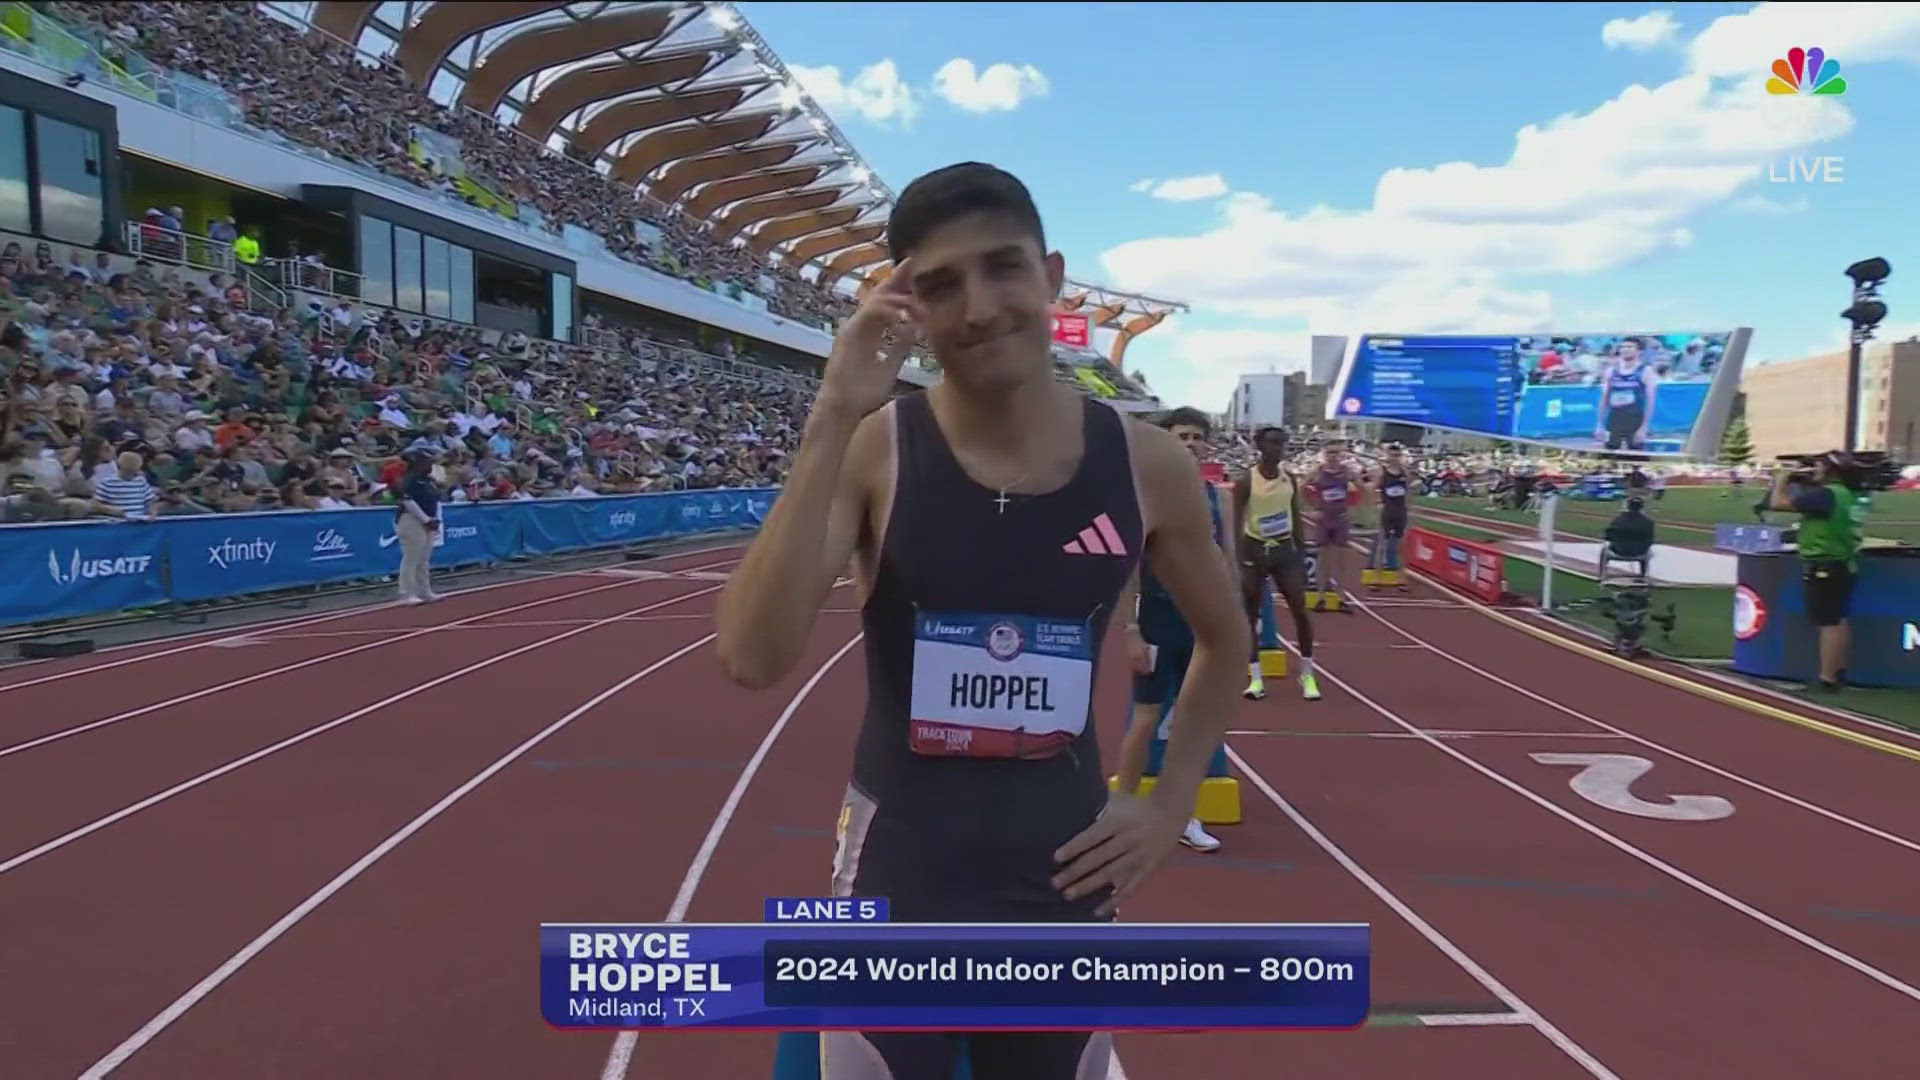 Competing in the 800-meter final, Hoppel secured a spot on Team USA with a top 3 finish in the finals of the Olympic Team Trials.